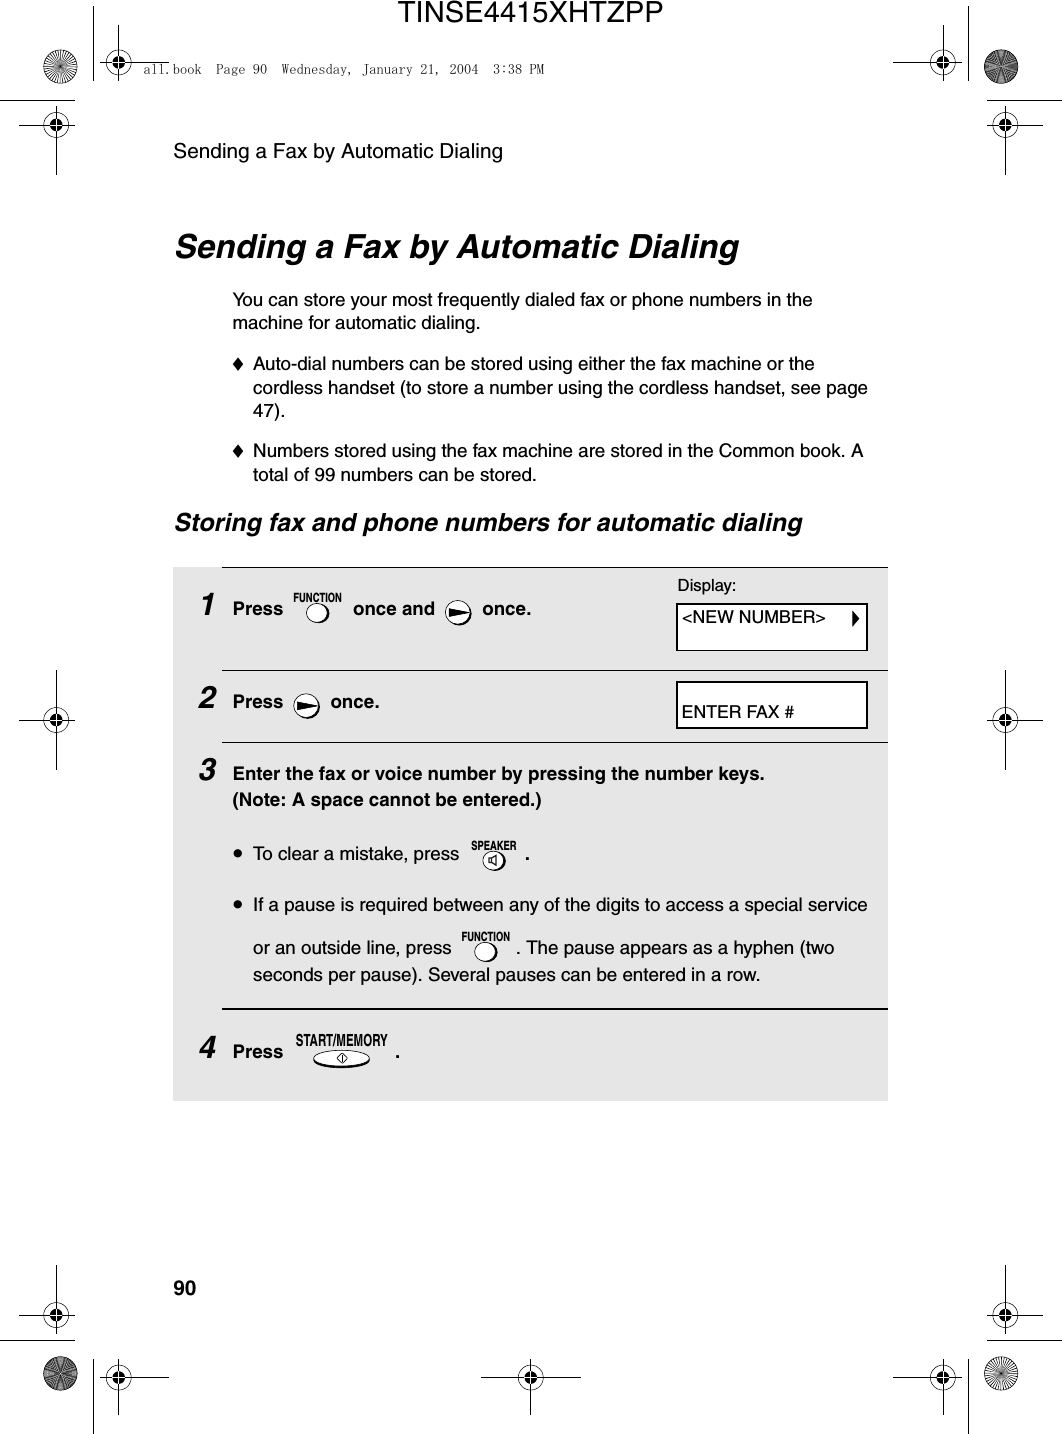 Sending a Fax by Automatic Dialing90Sending a Fax by Automatic DialingYou can store your most frequently dialed fax or phone numbers in the machine for automatic dialing. ♦Auto-dial numbers can be stored using either the fax machine or the cordless handset (to store a number using the cordless handset, see page 47). ♦Numbers stored using the fax machine are stored in the Common book. A total of 99 numbers can be stored. Storing fax and phone numbers for automatic dialing1Press   once and   once.2Press  once.3Enter the fax or voice number by pressing the number keys. (Note: A space cannot be entered.)•To clear a mistake, press  .•If a pause is required between any of the digits to access a special service or an outside line, press  . The pause appears as a hyphen (two seconds per pause). Several pauses can be entered in a row.4Press .FUNCTIONSPEAKERFUNCTIONSTART/MEMORYDisplay:&lt;NEW NUMBER&gt;ENTER FAX #all.book  Page 90  Wednesday, January 21, 2004  3:38 PMTINSE4415XHTZPP